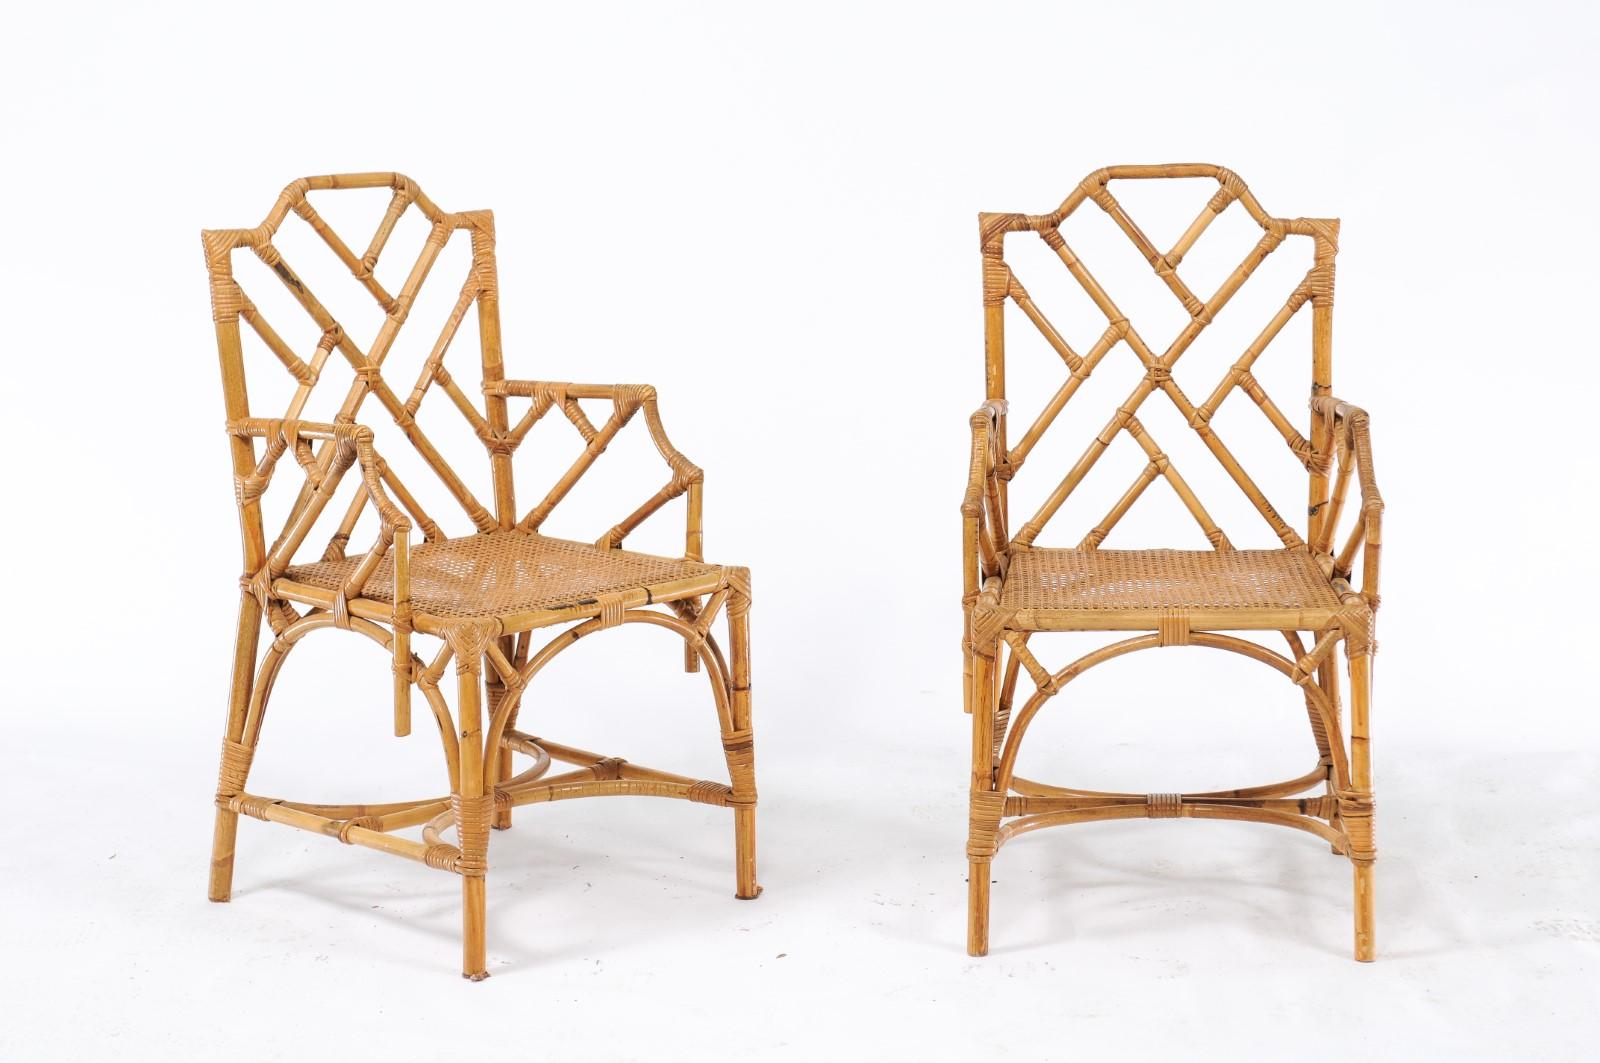 A pair of English vintage Chinese Chippendale style rattan armchairs from the mid-20th century with latticed arms and backs and curved cross stretchers. We are always on the lookout for pretty, midcentury rattan chairs, and this pair of Chinese